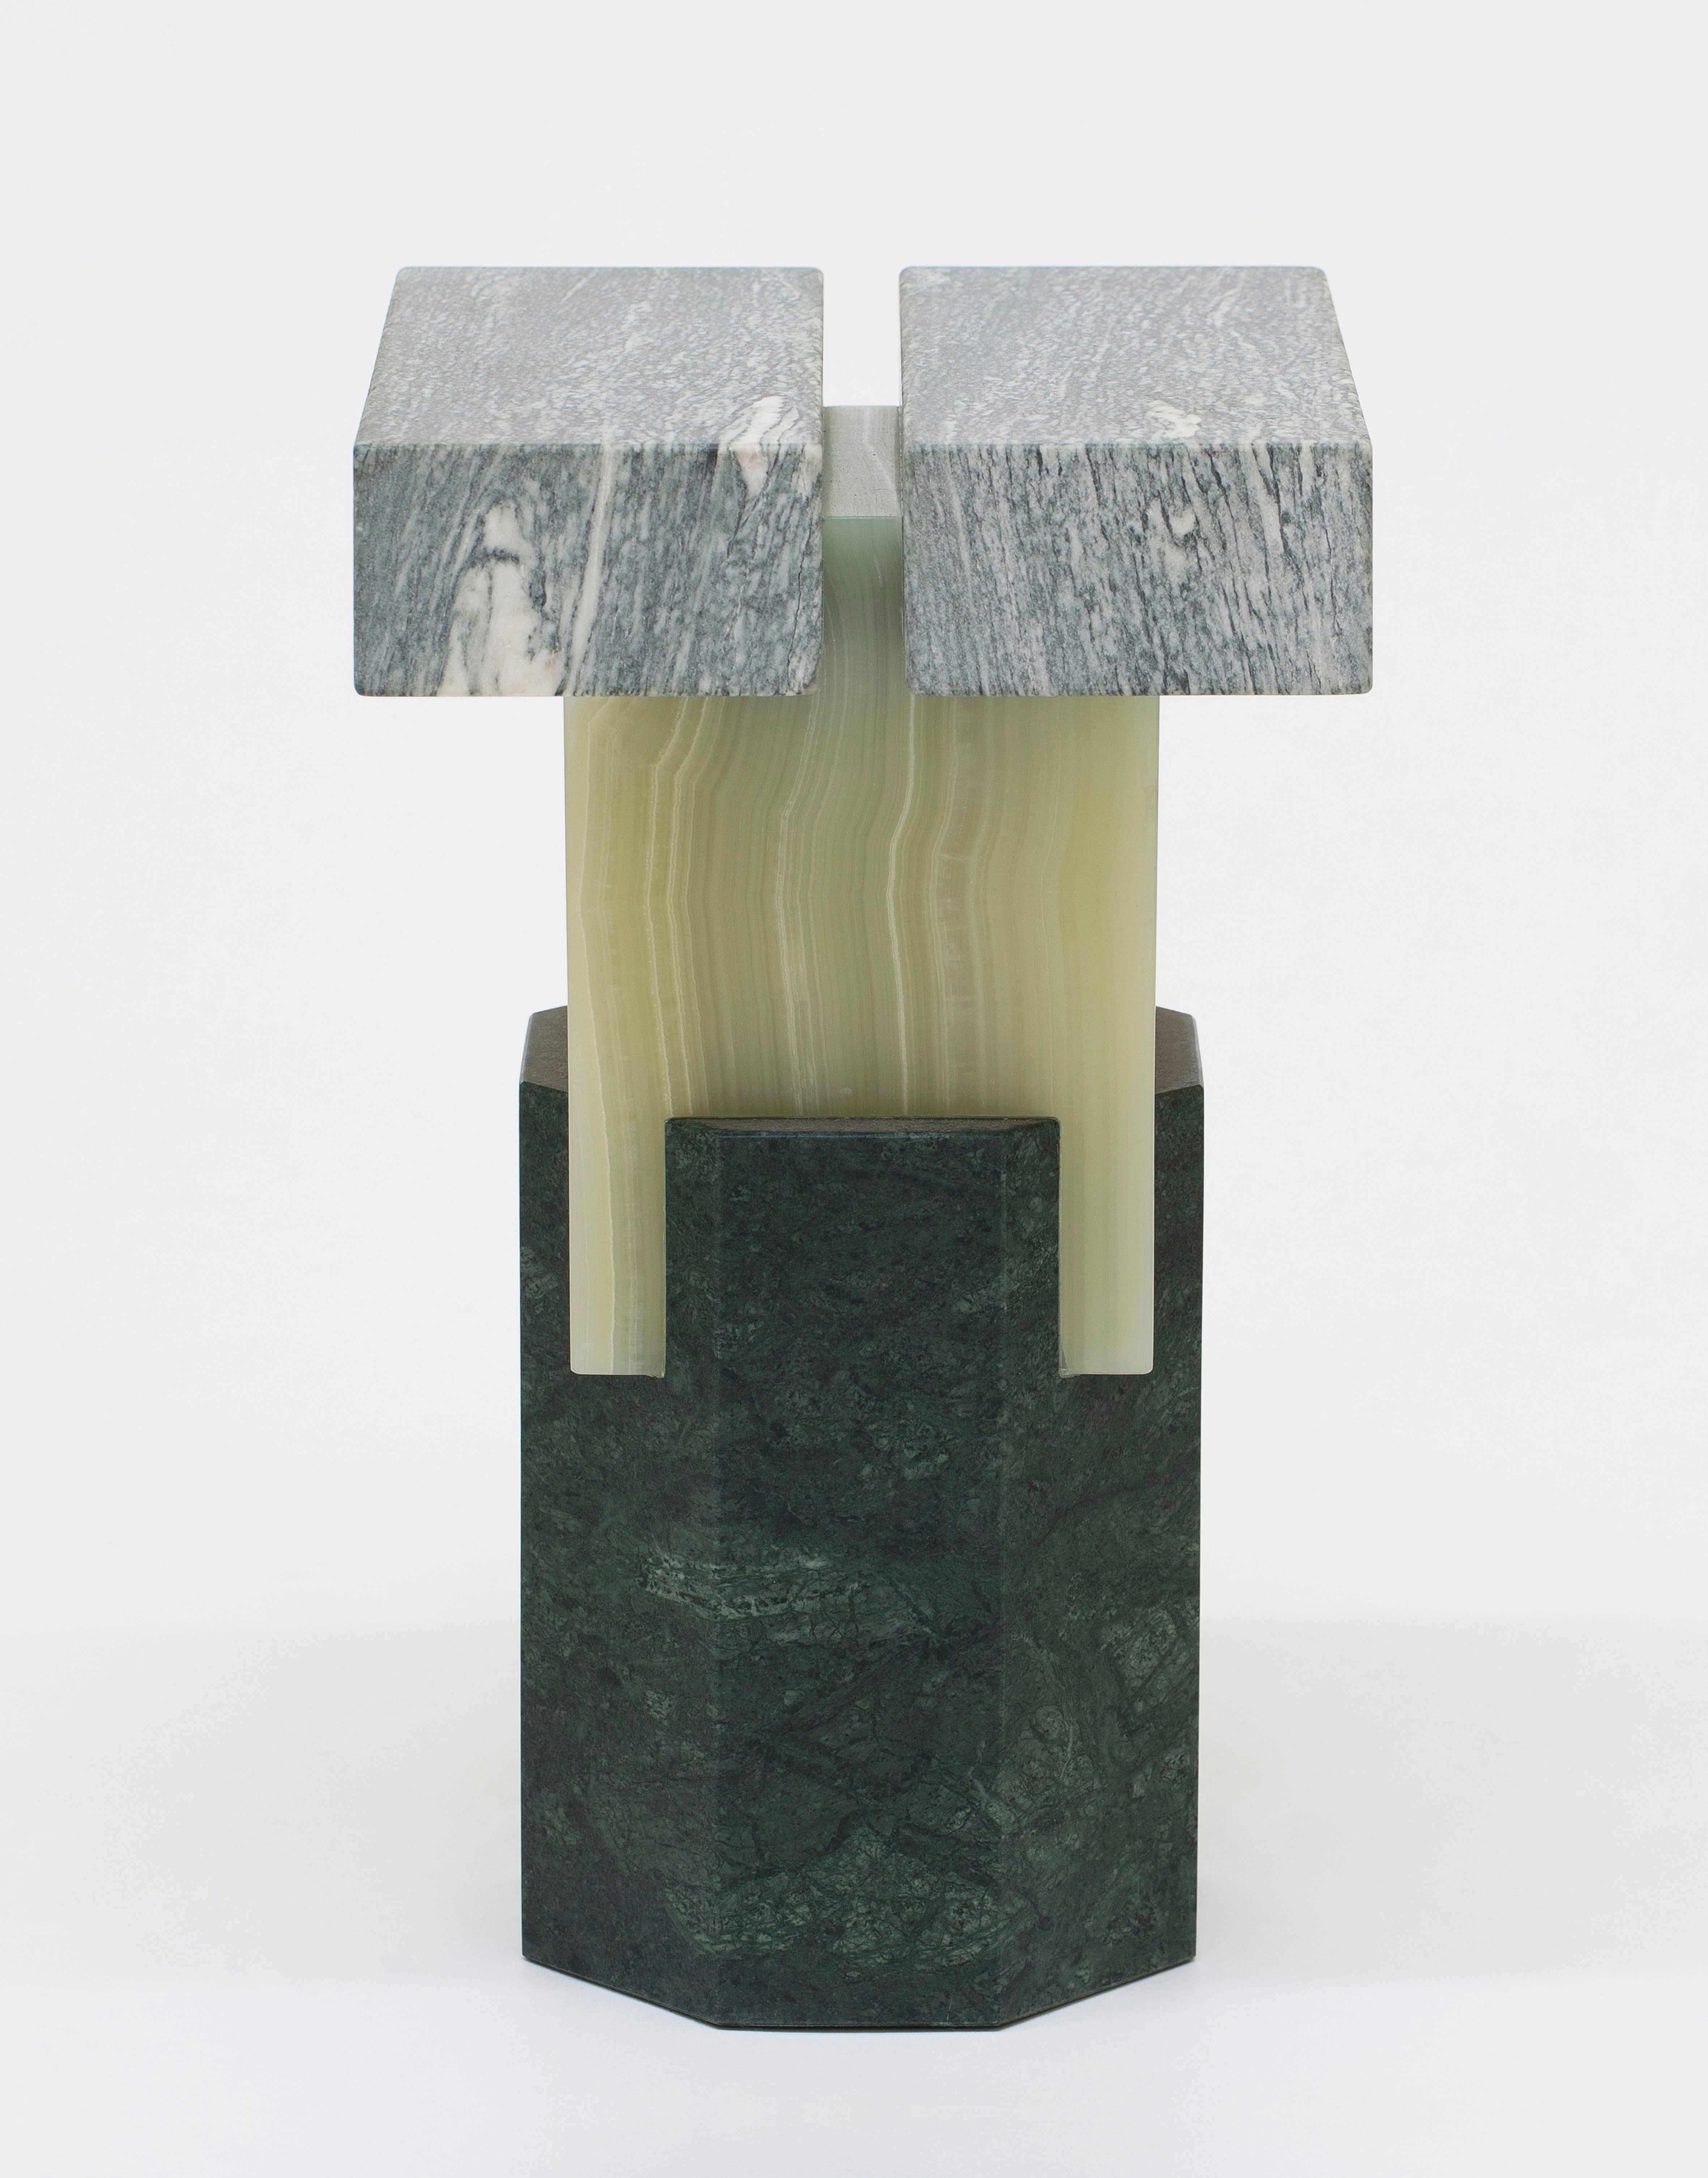 Marble Ionik Chroma stool by Oeuffice
Edition: 12 + 2AP
2014
Dimensions: 25 x 26 x 42 cm
Materials: Cipollino Apuano marble, Onice Verde onyx, Verde Guatemala marble

Kapital is a series of limited edition tables and stools based on essential